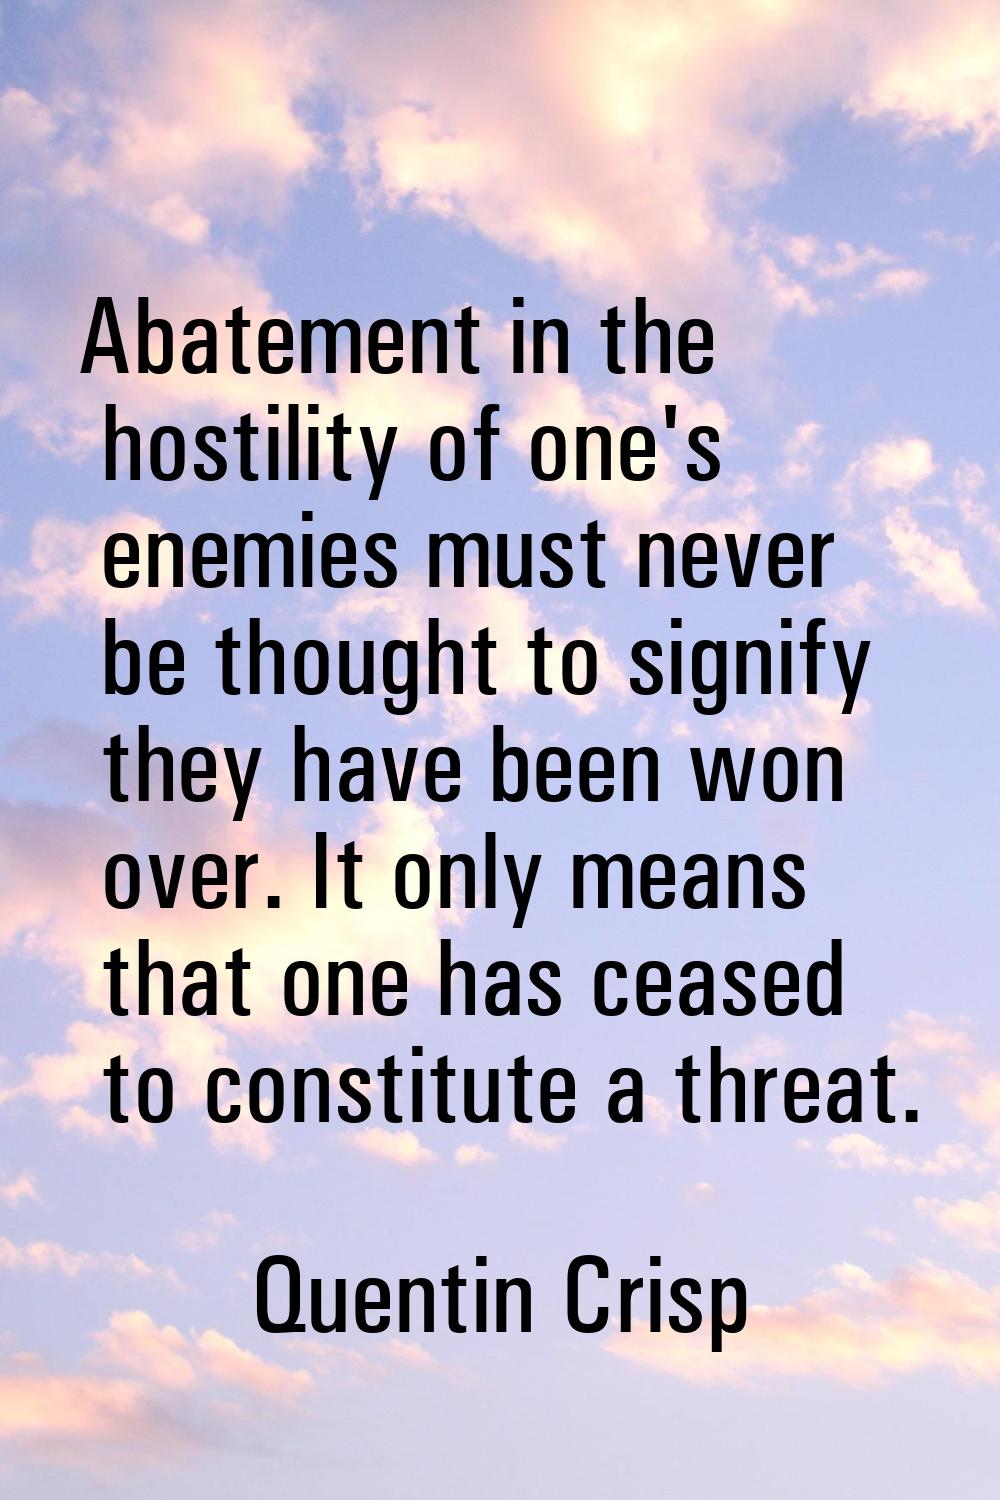 Abatement in the hostility of one's enemies must never be thought to signify they have been won ove